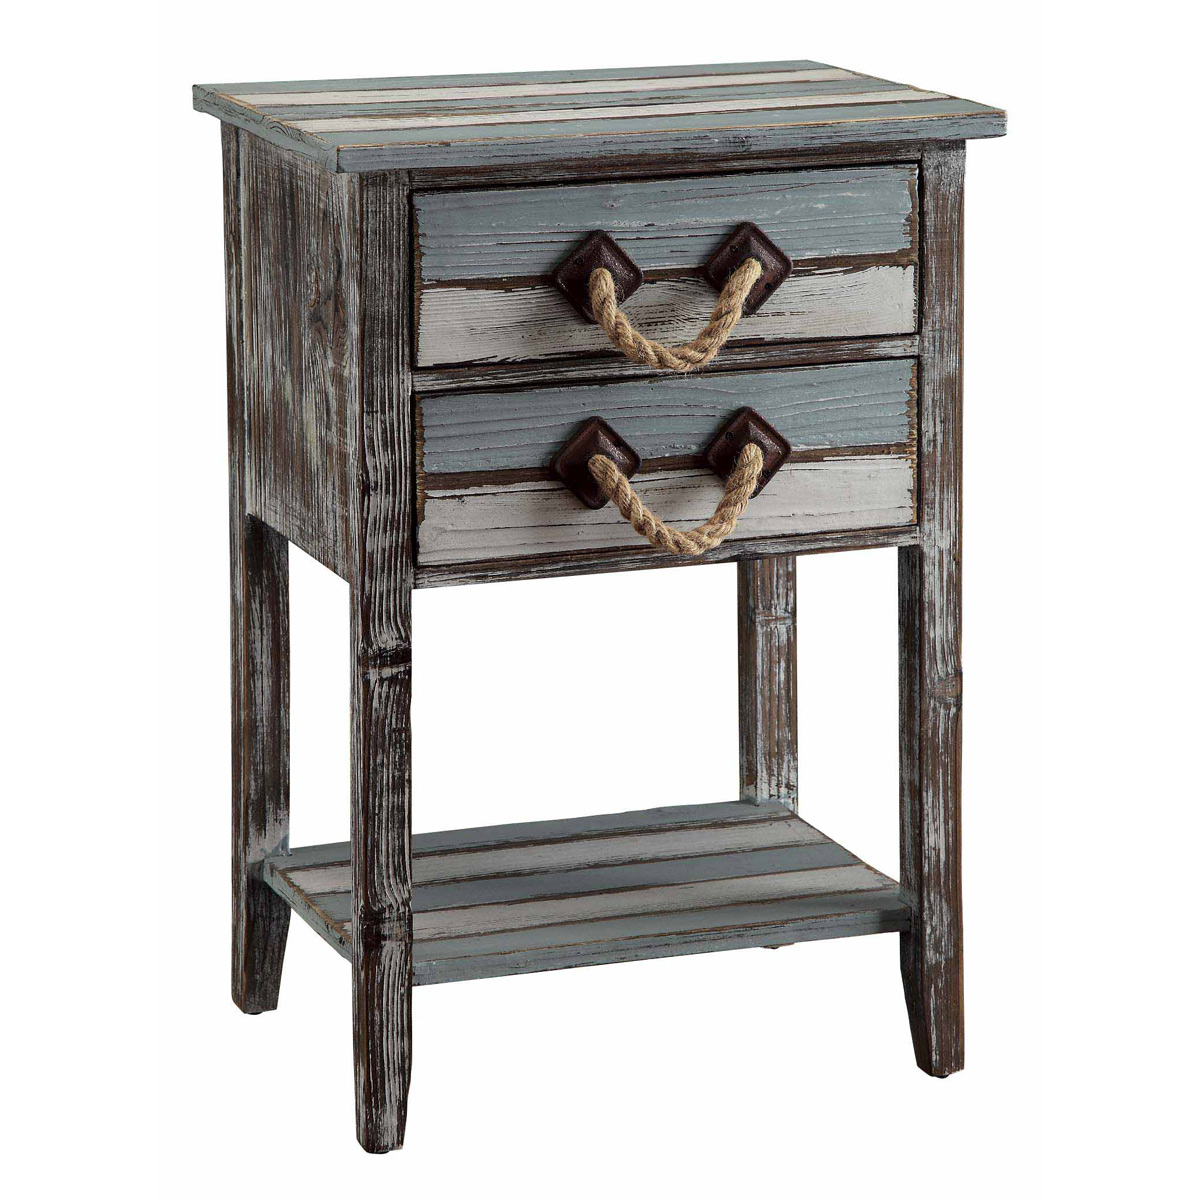 beach style furniture capeside weathered wood accent table bella gray collapsible trestle retro bedroom ikea office storage sheesham nest tables brass side dining with six chairs